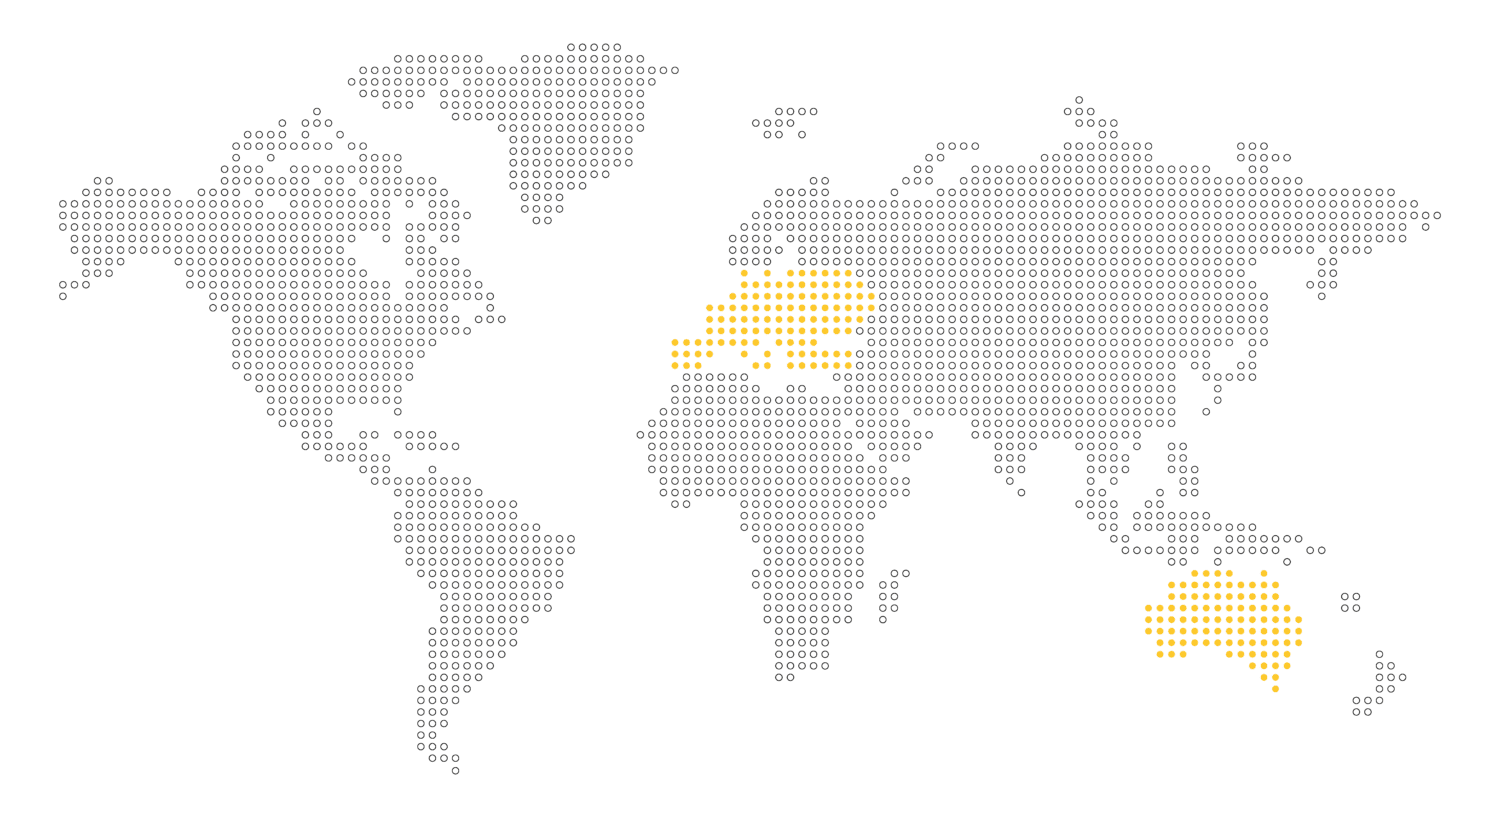 Worldmap with powercloud Locations